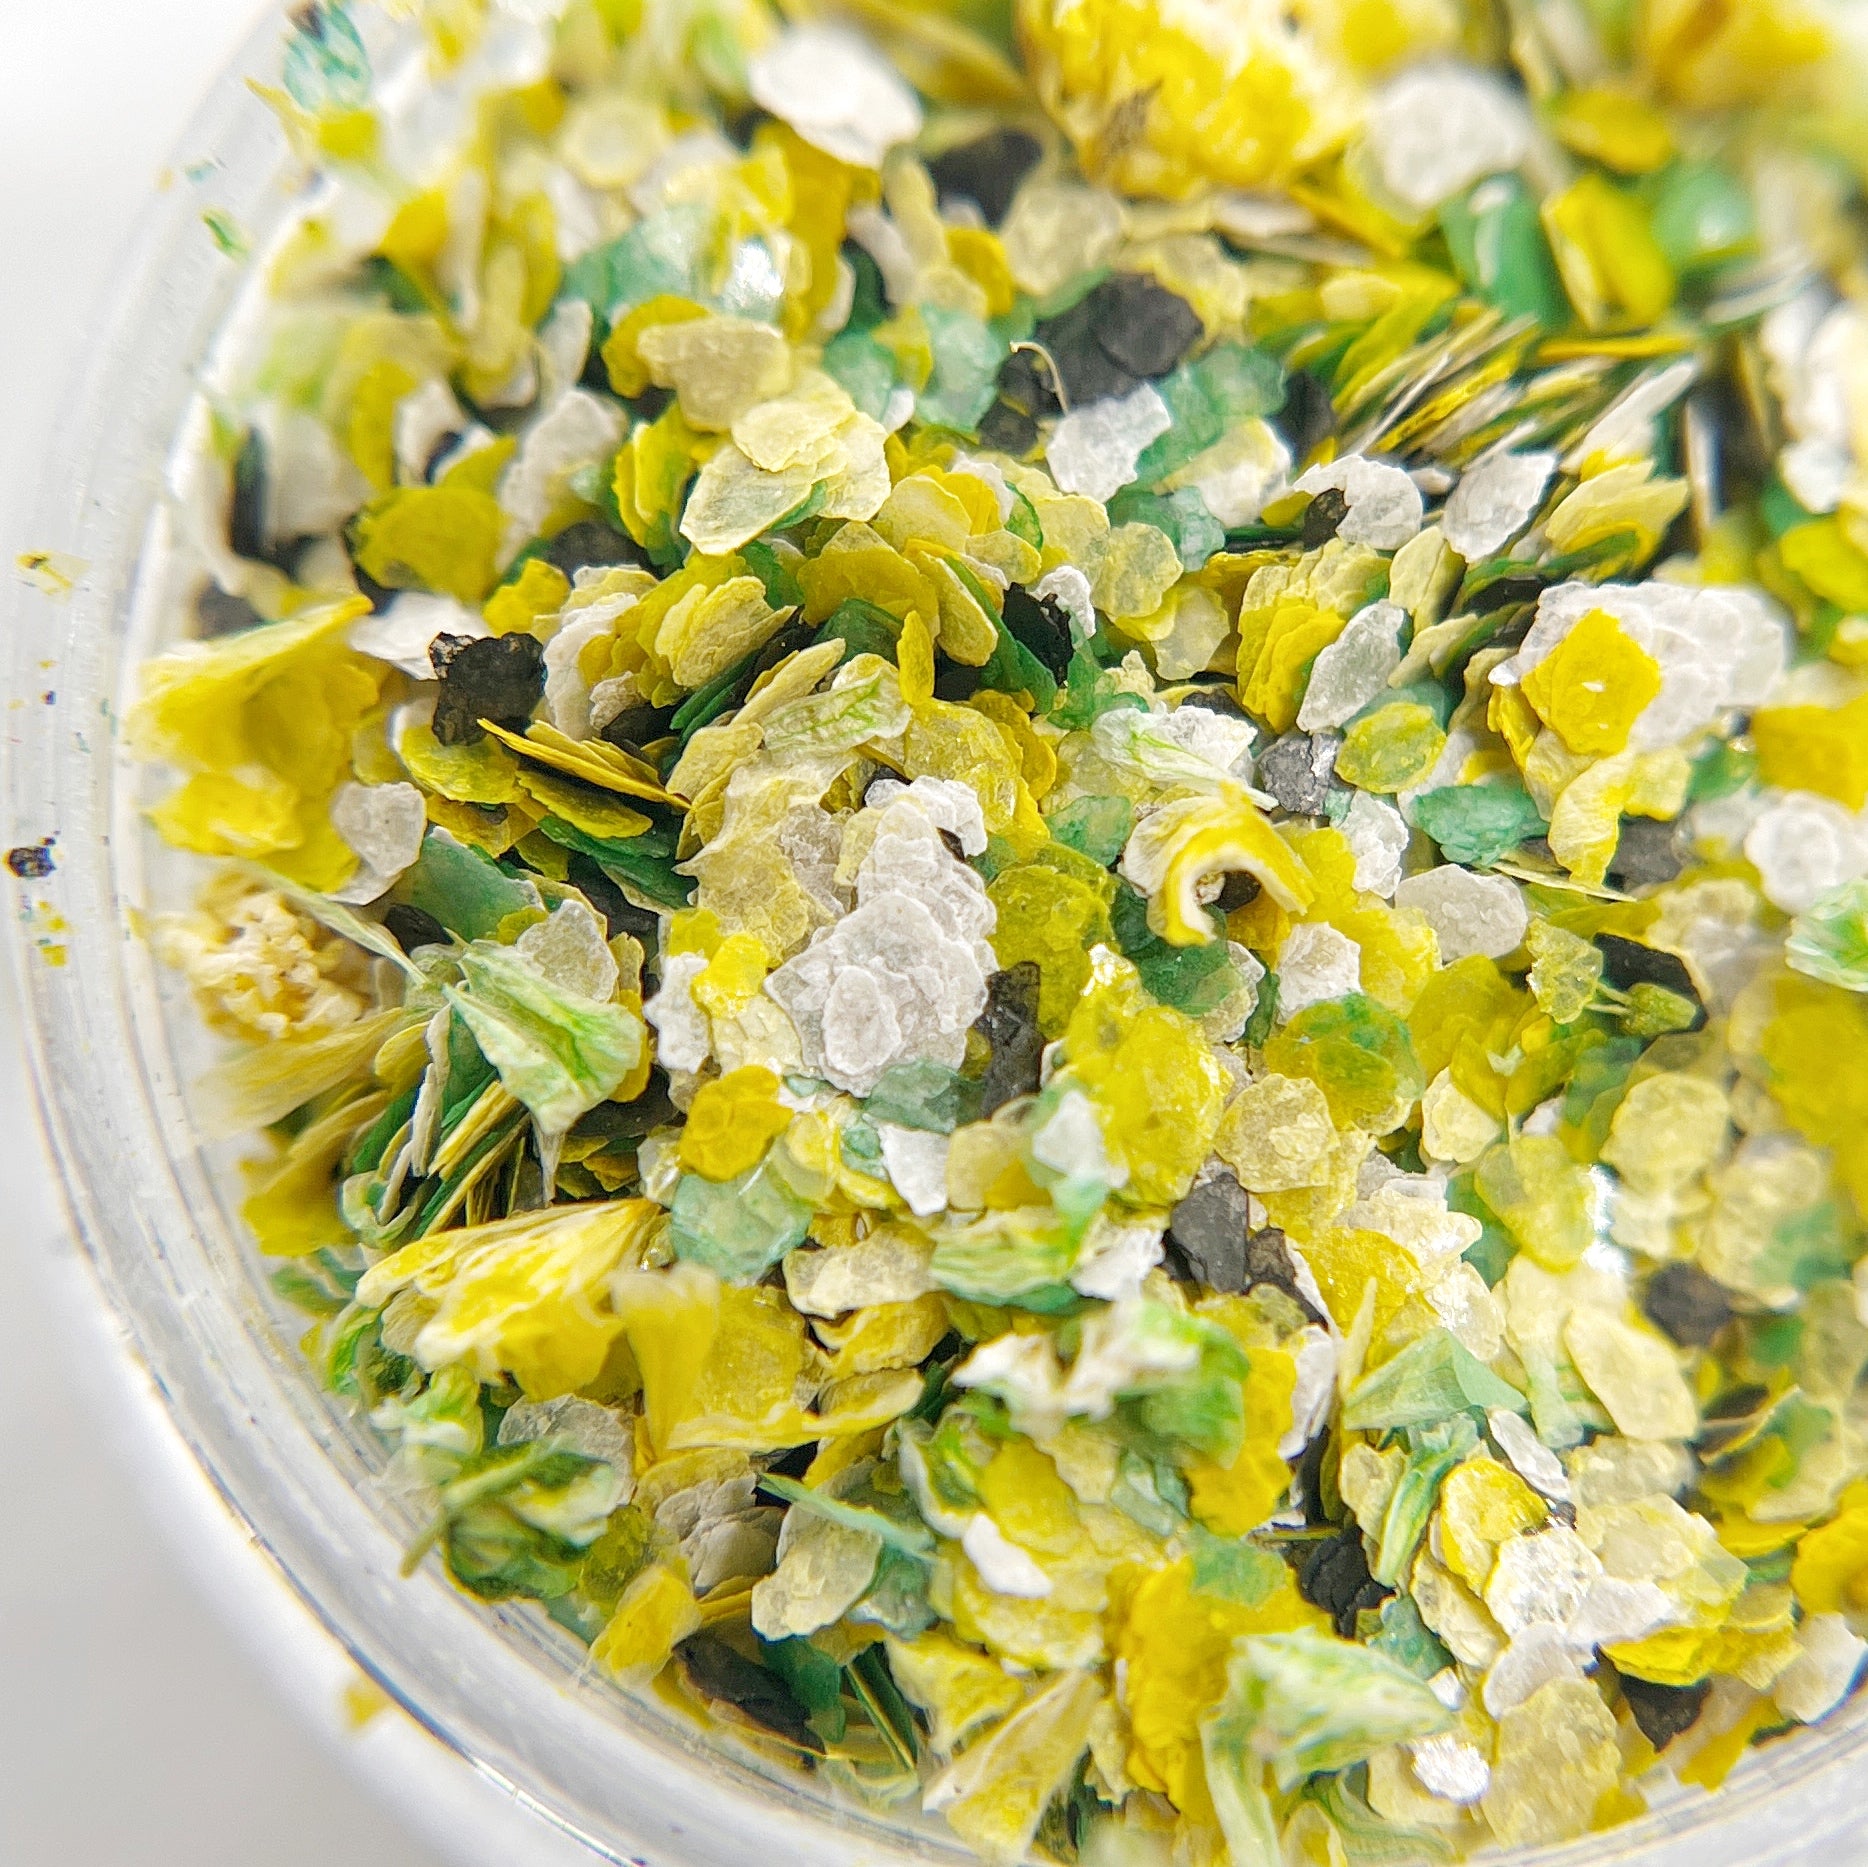 Mixed Flower Confetti (Dried)